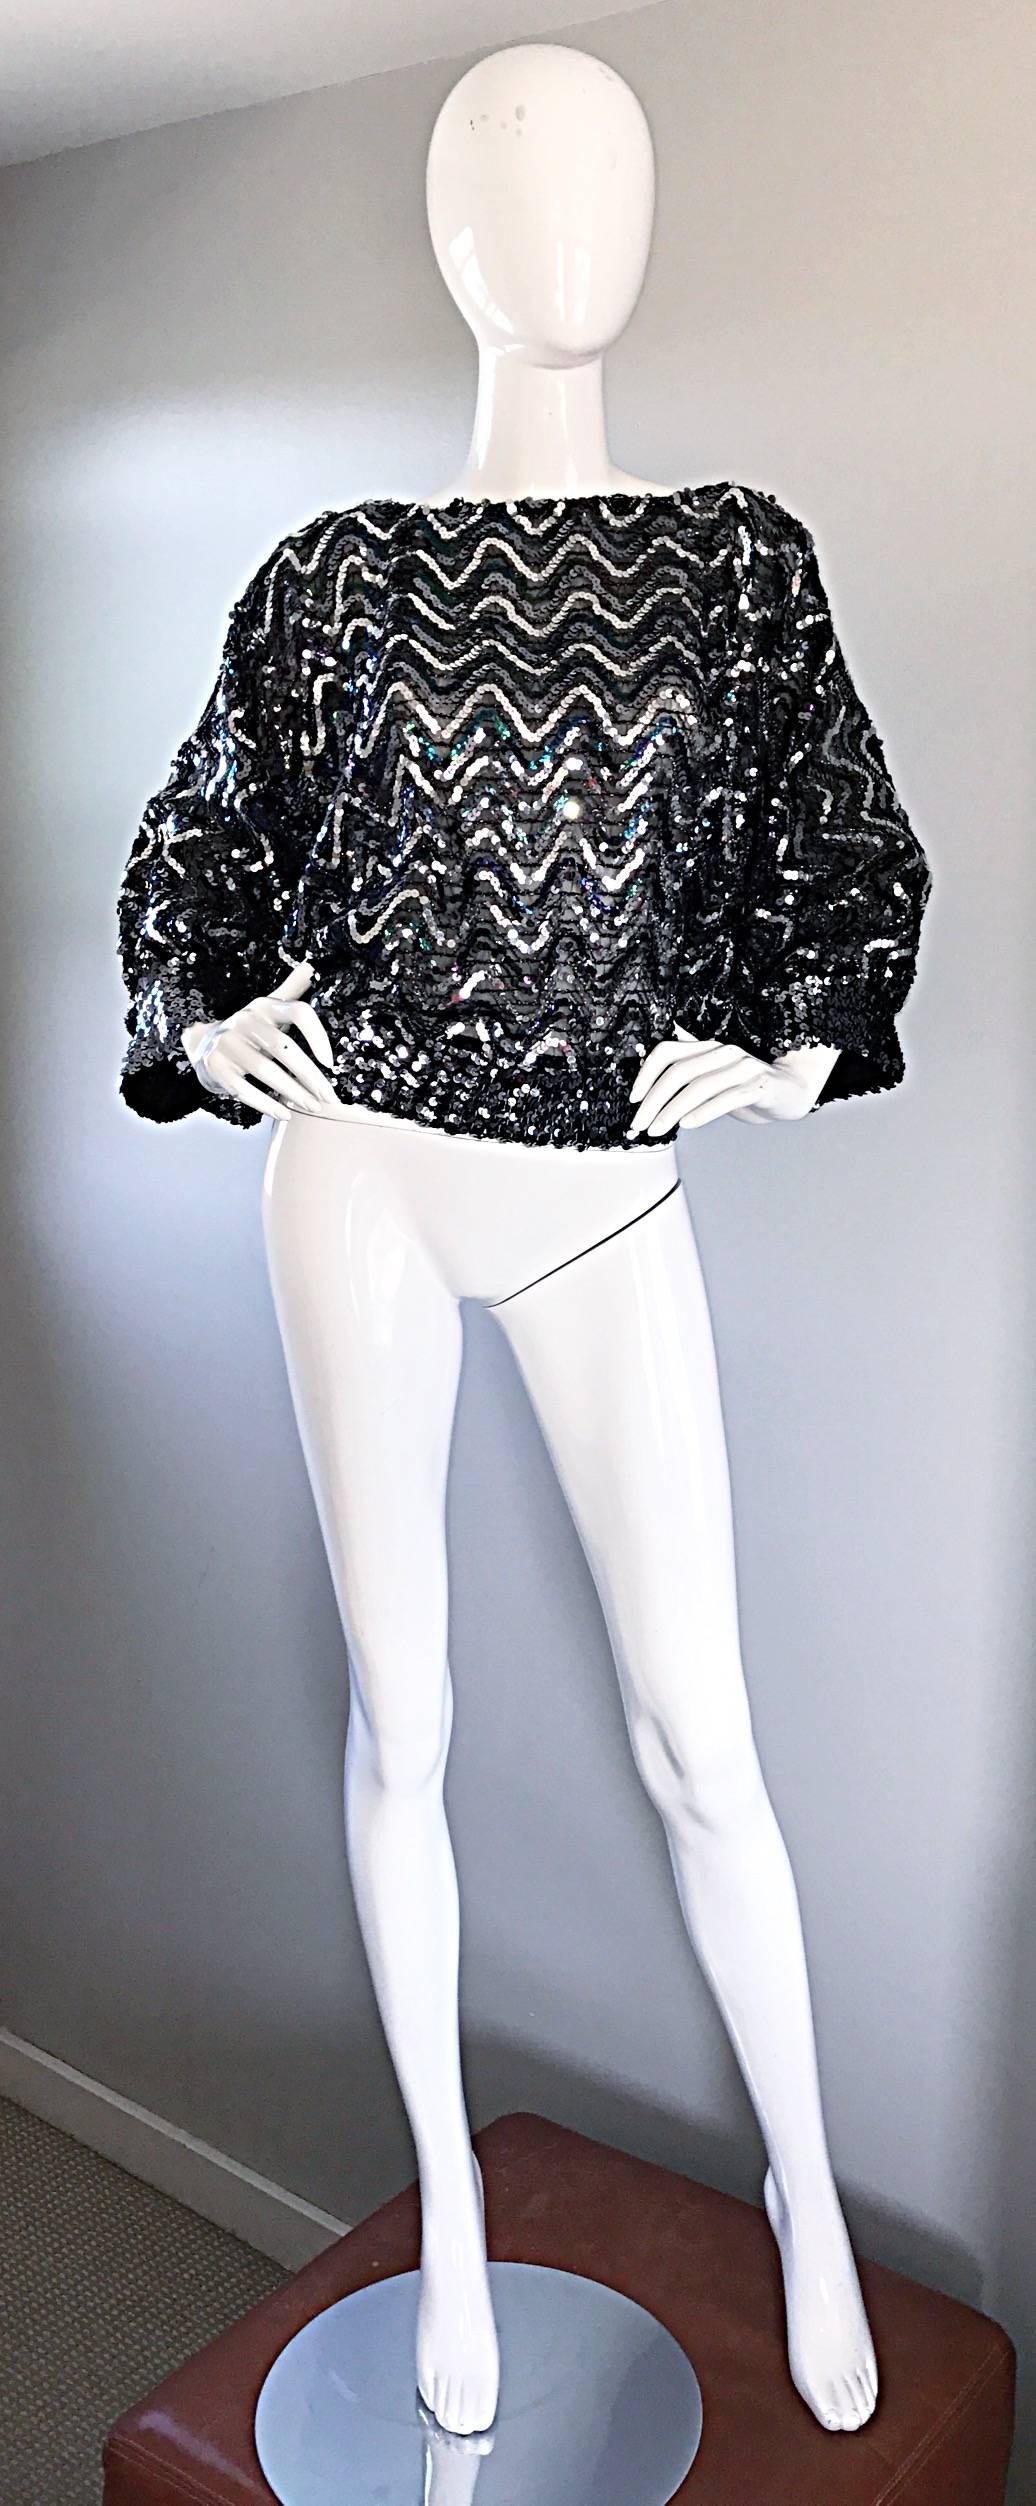 Incredible 1970s sequined dolman sleeve blouse! Features silver and colorful iridescent sequins in a chevron pattern throughout. Studio 54 vibes, with elastic sleeve cuffs and waistband that stretches to fit. Single closure button at top back neck.